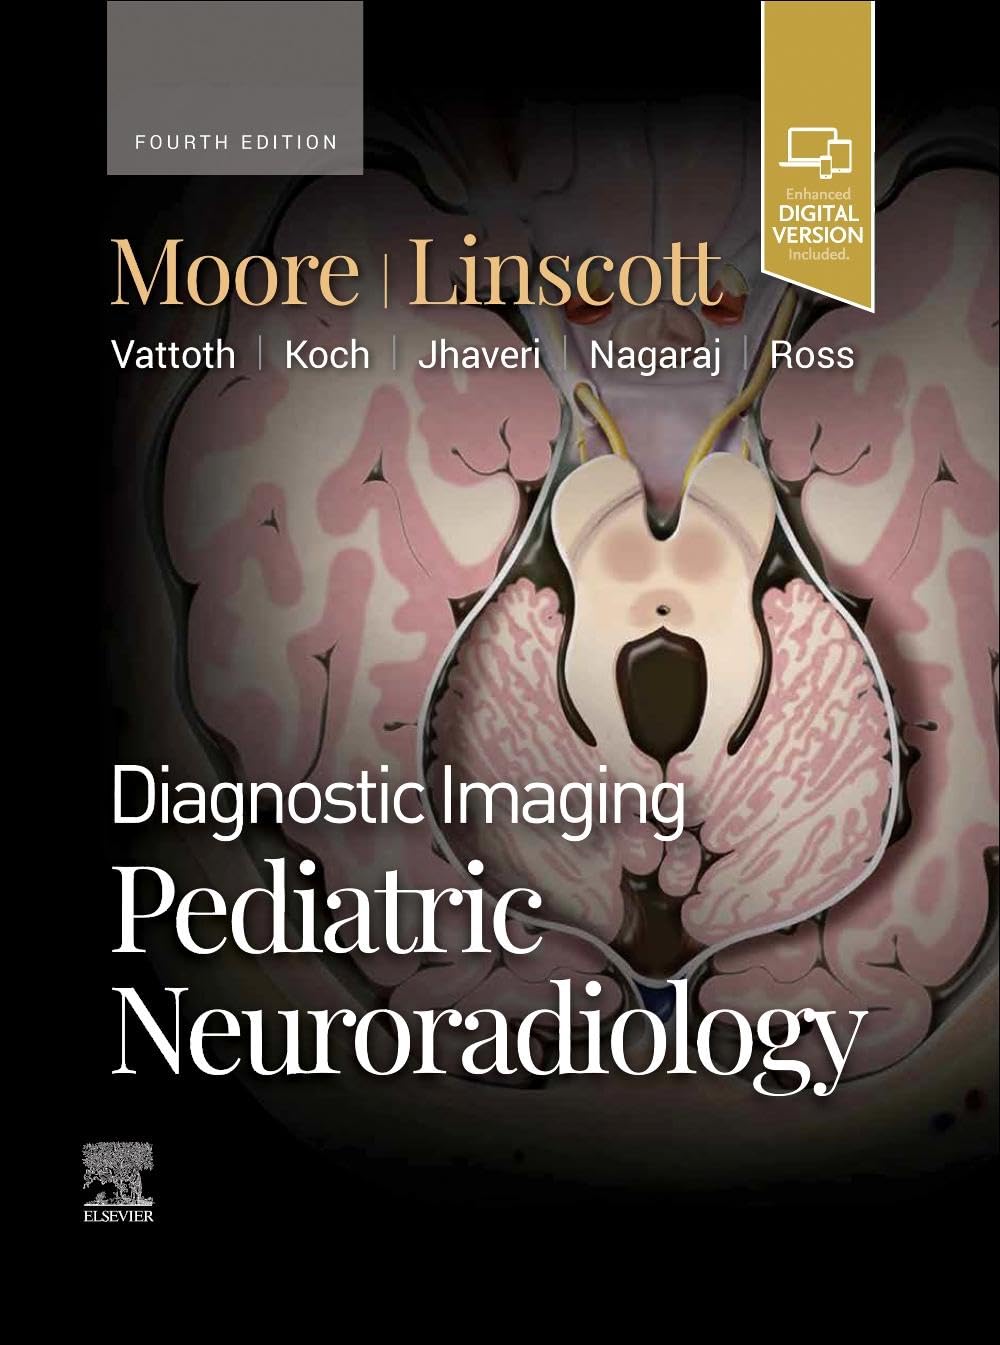 (EBook PDF)Diagnostic Imaging: Pediatric Neuroradiology, 4th edition by Kevin R. Moore MD , Luke L. Linscott MD